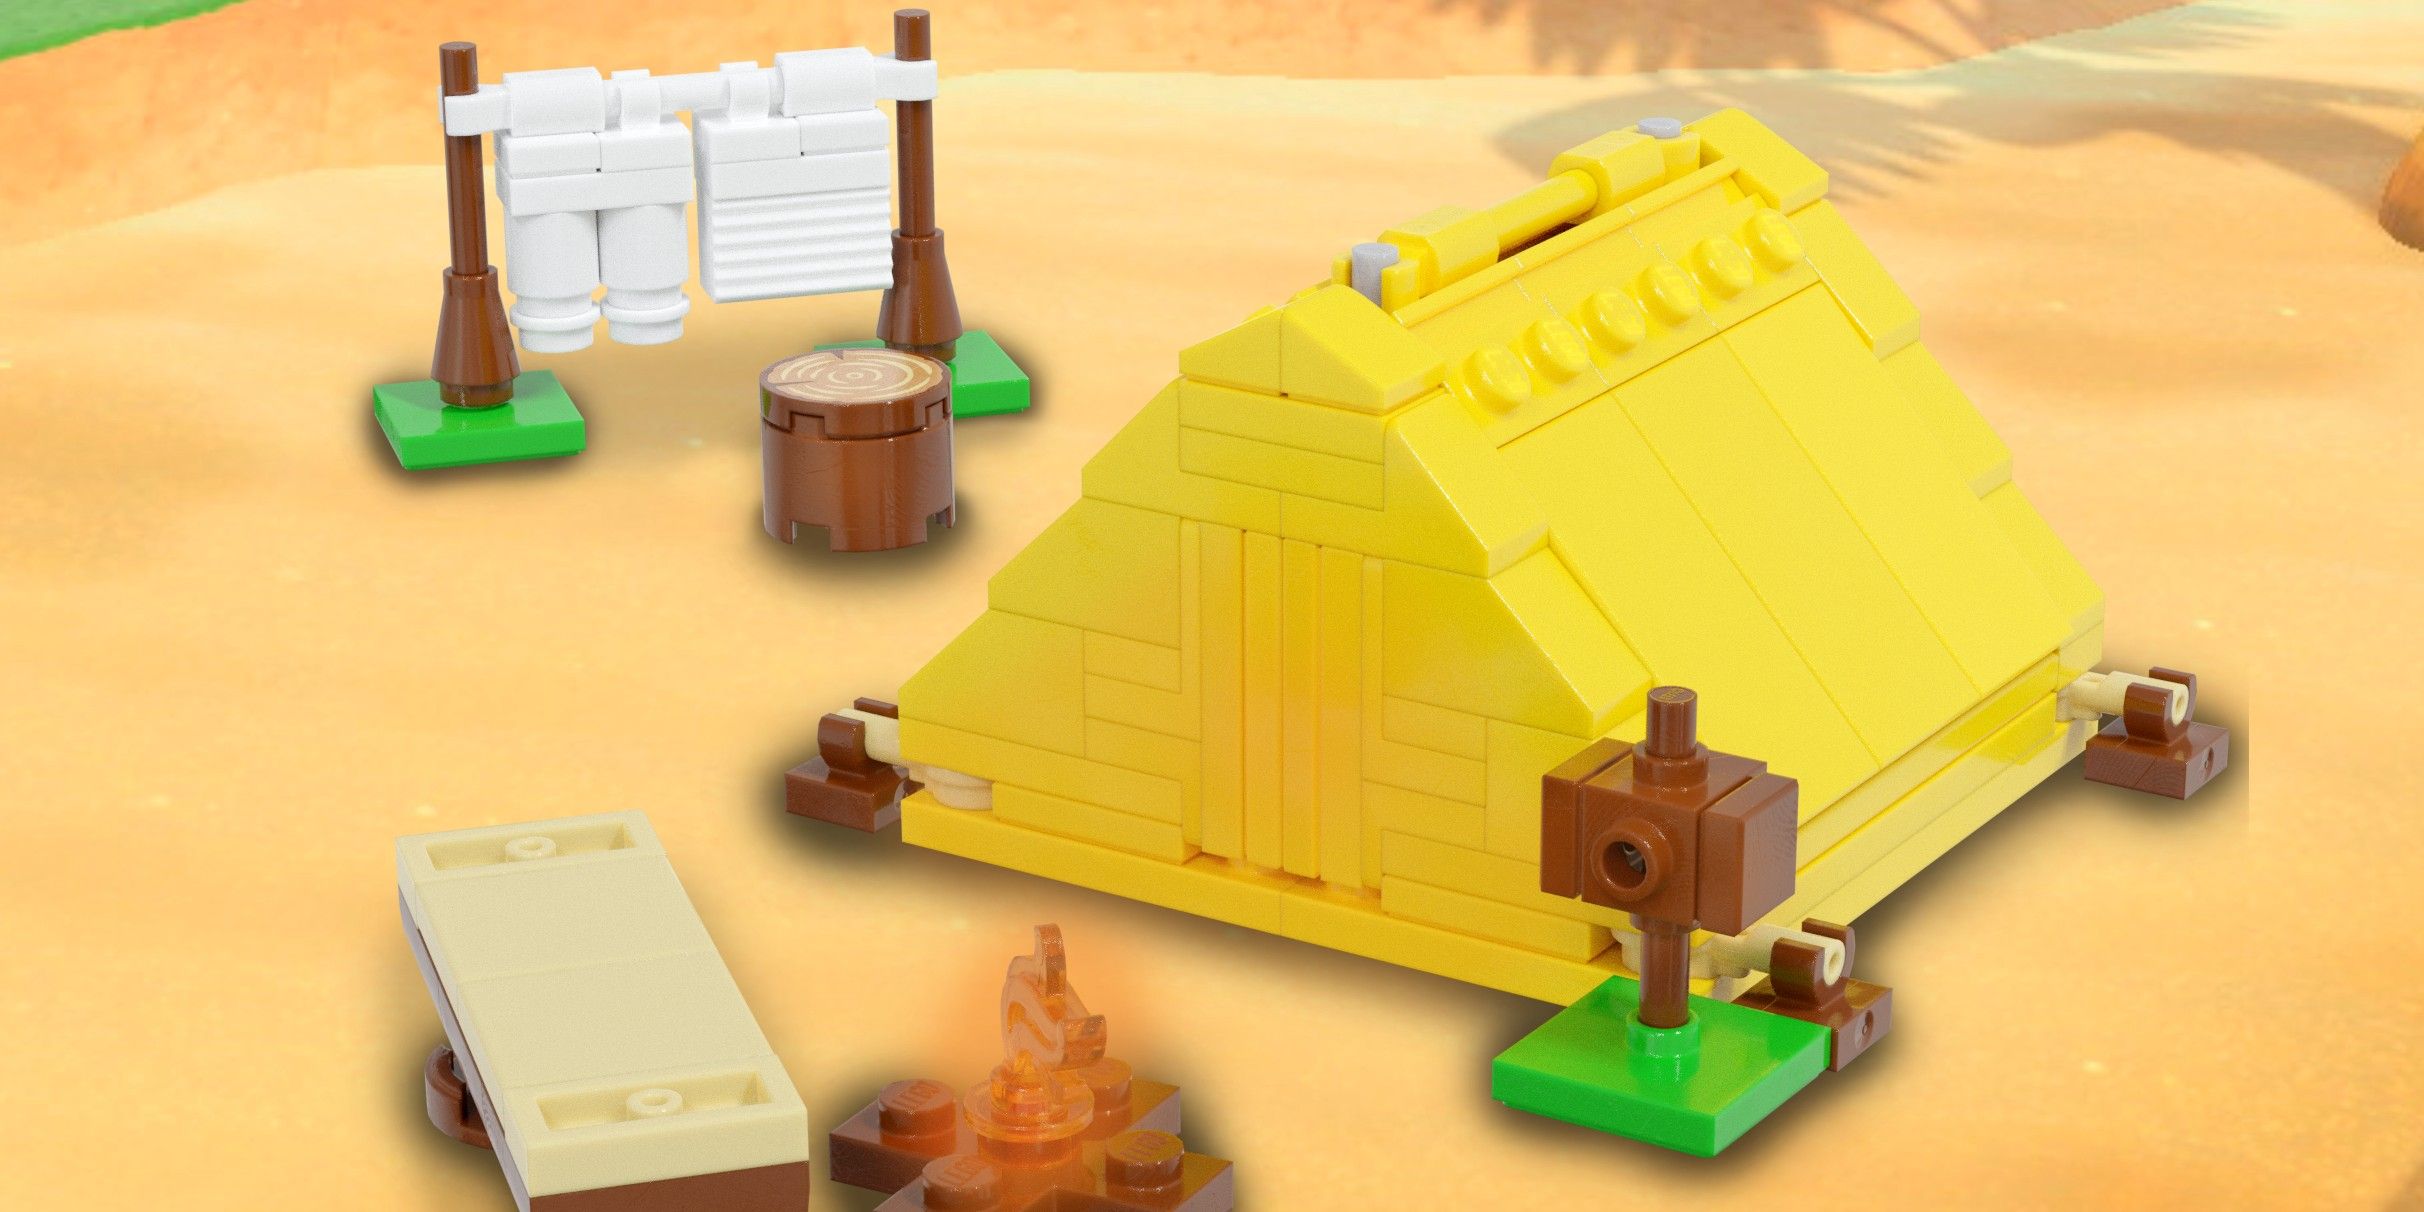 ACNH Player’s Game-Inspired Lego Builds Look Like Official Sets